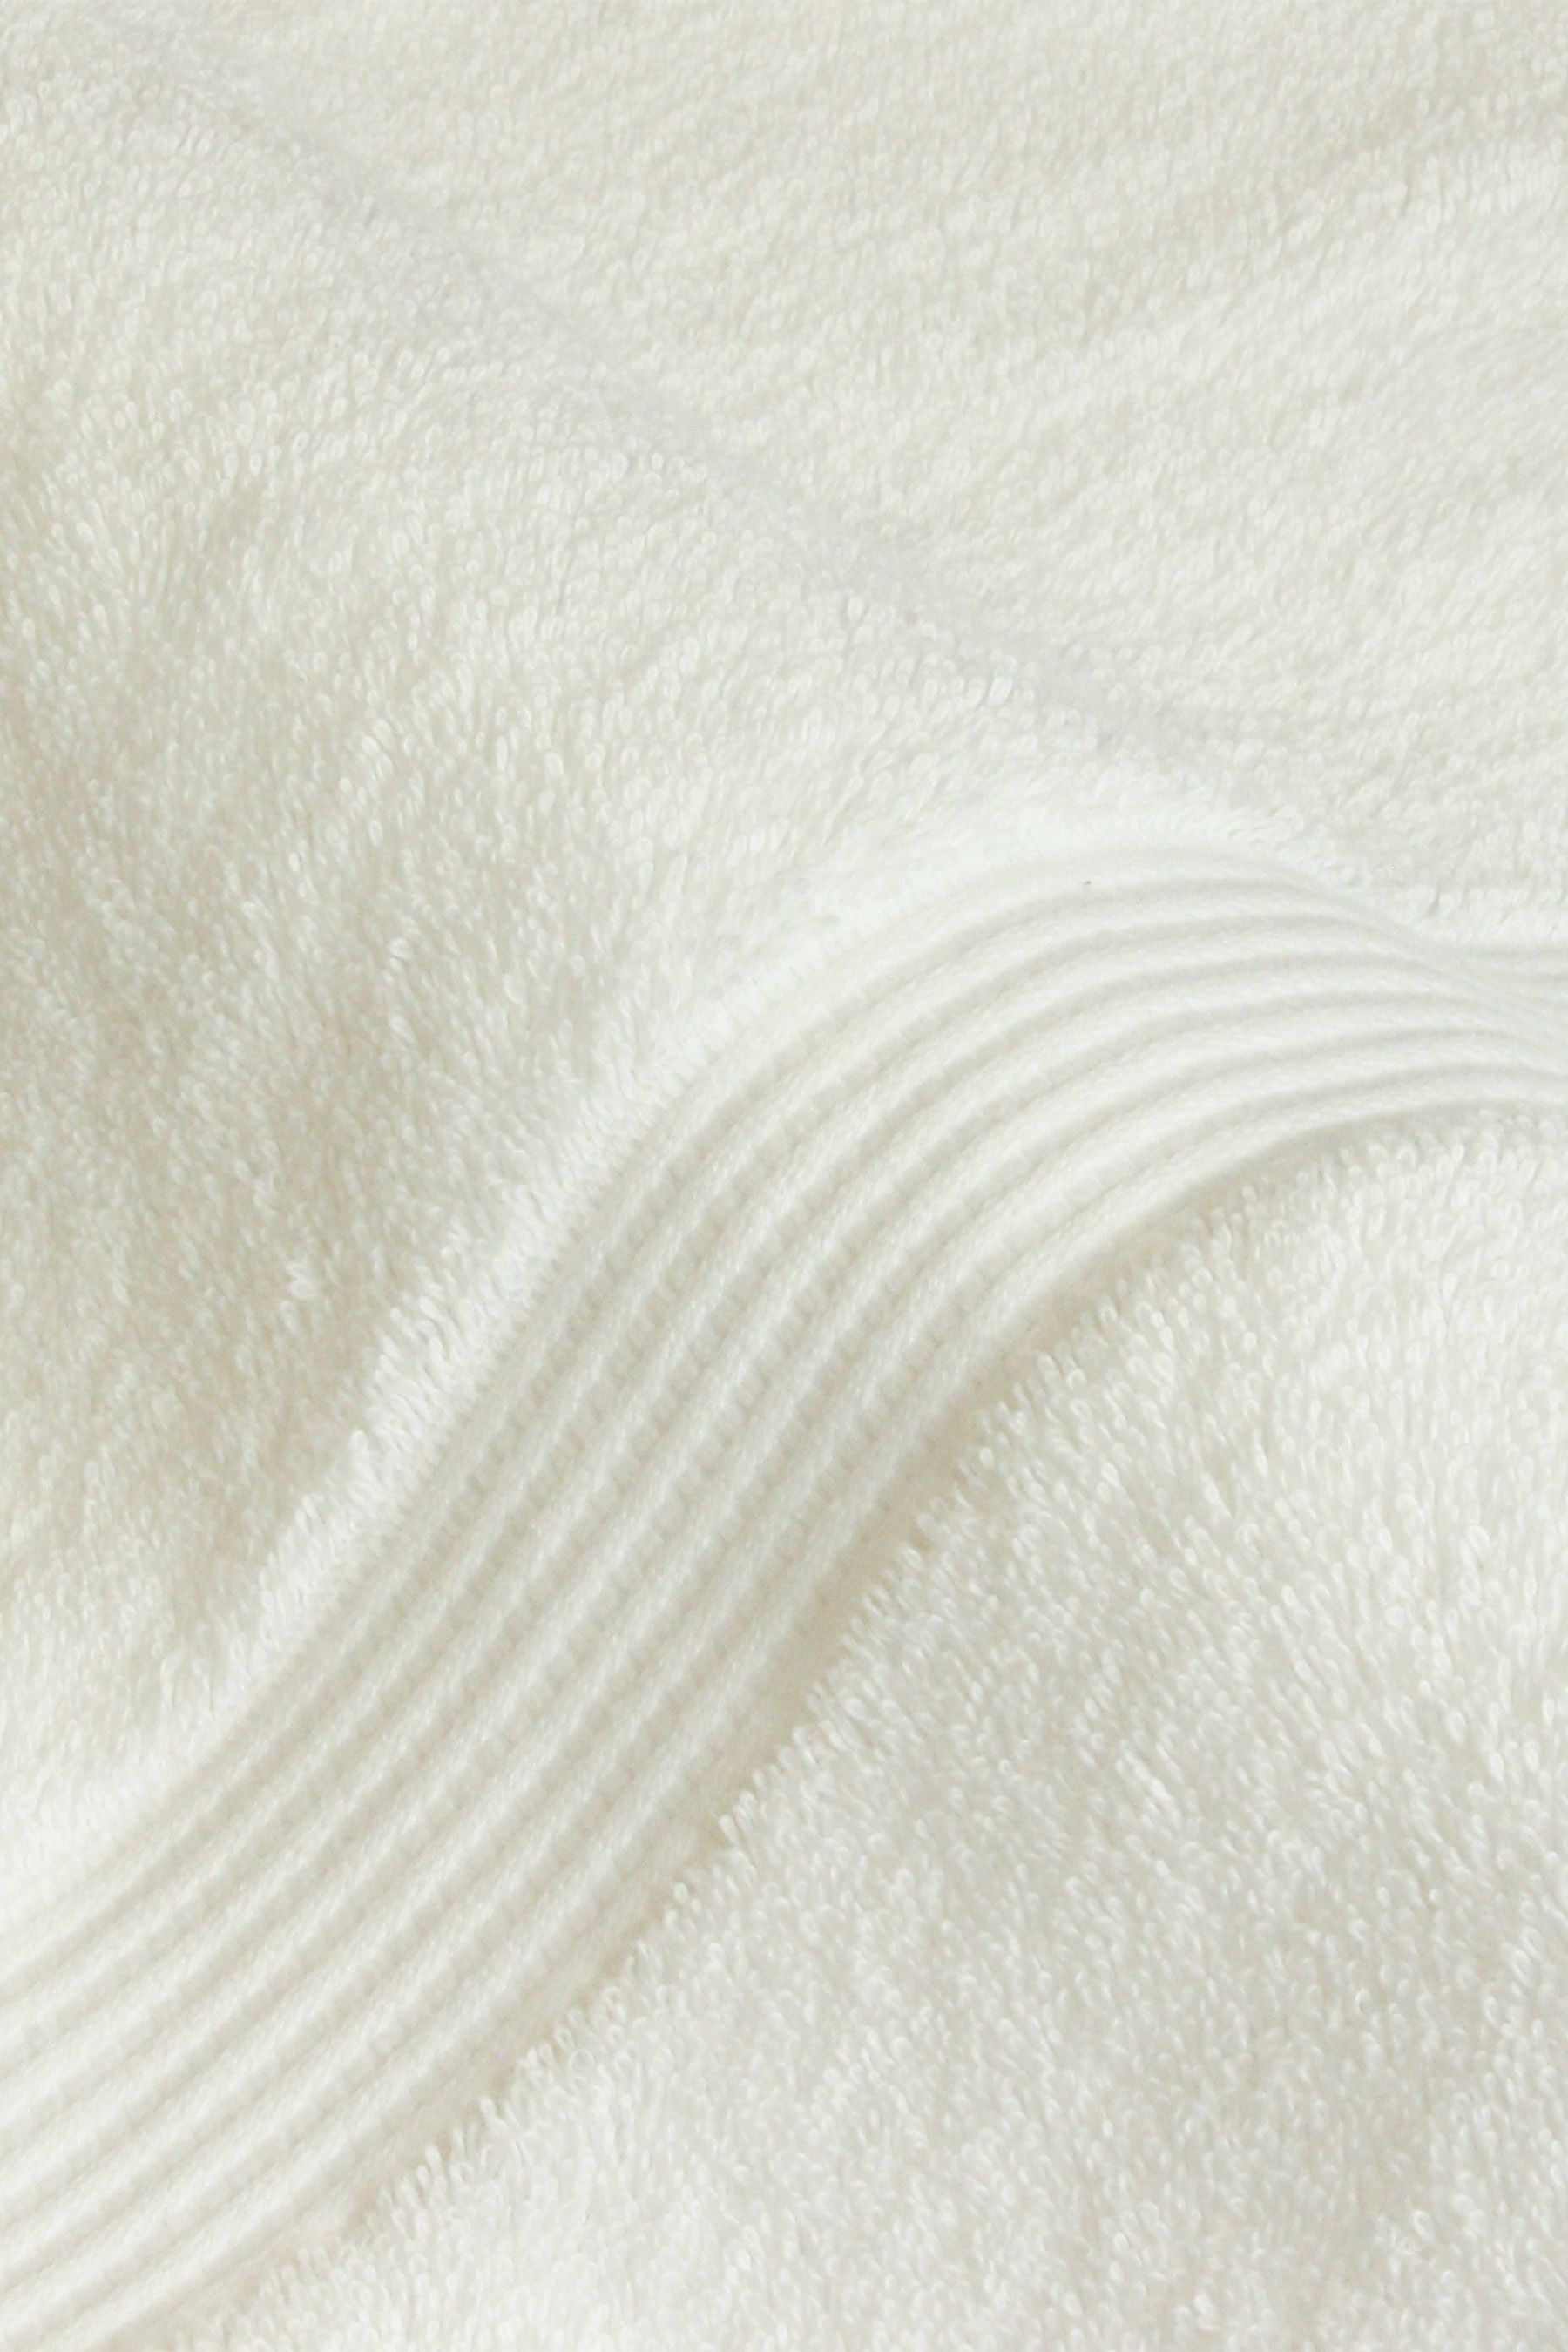 Buy Riva Paoletti 4 Piece White Cleopatra Towel Bale from the Next UK ...